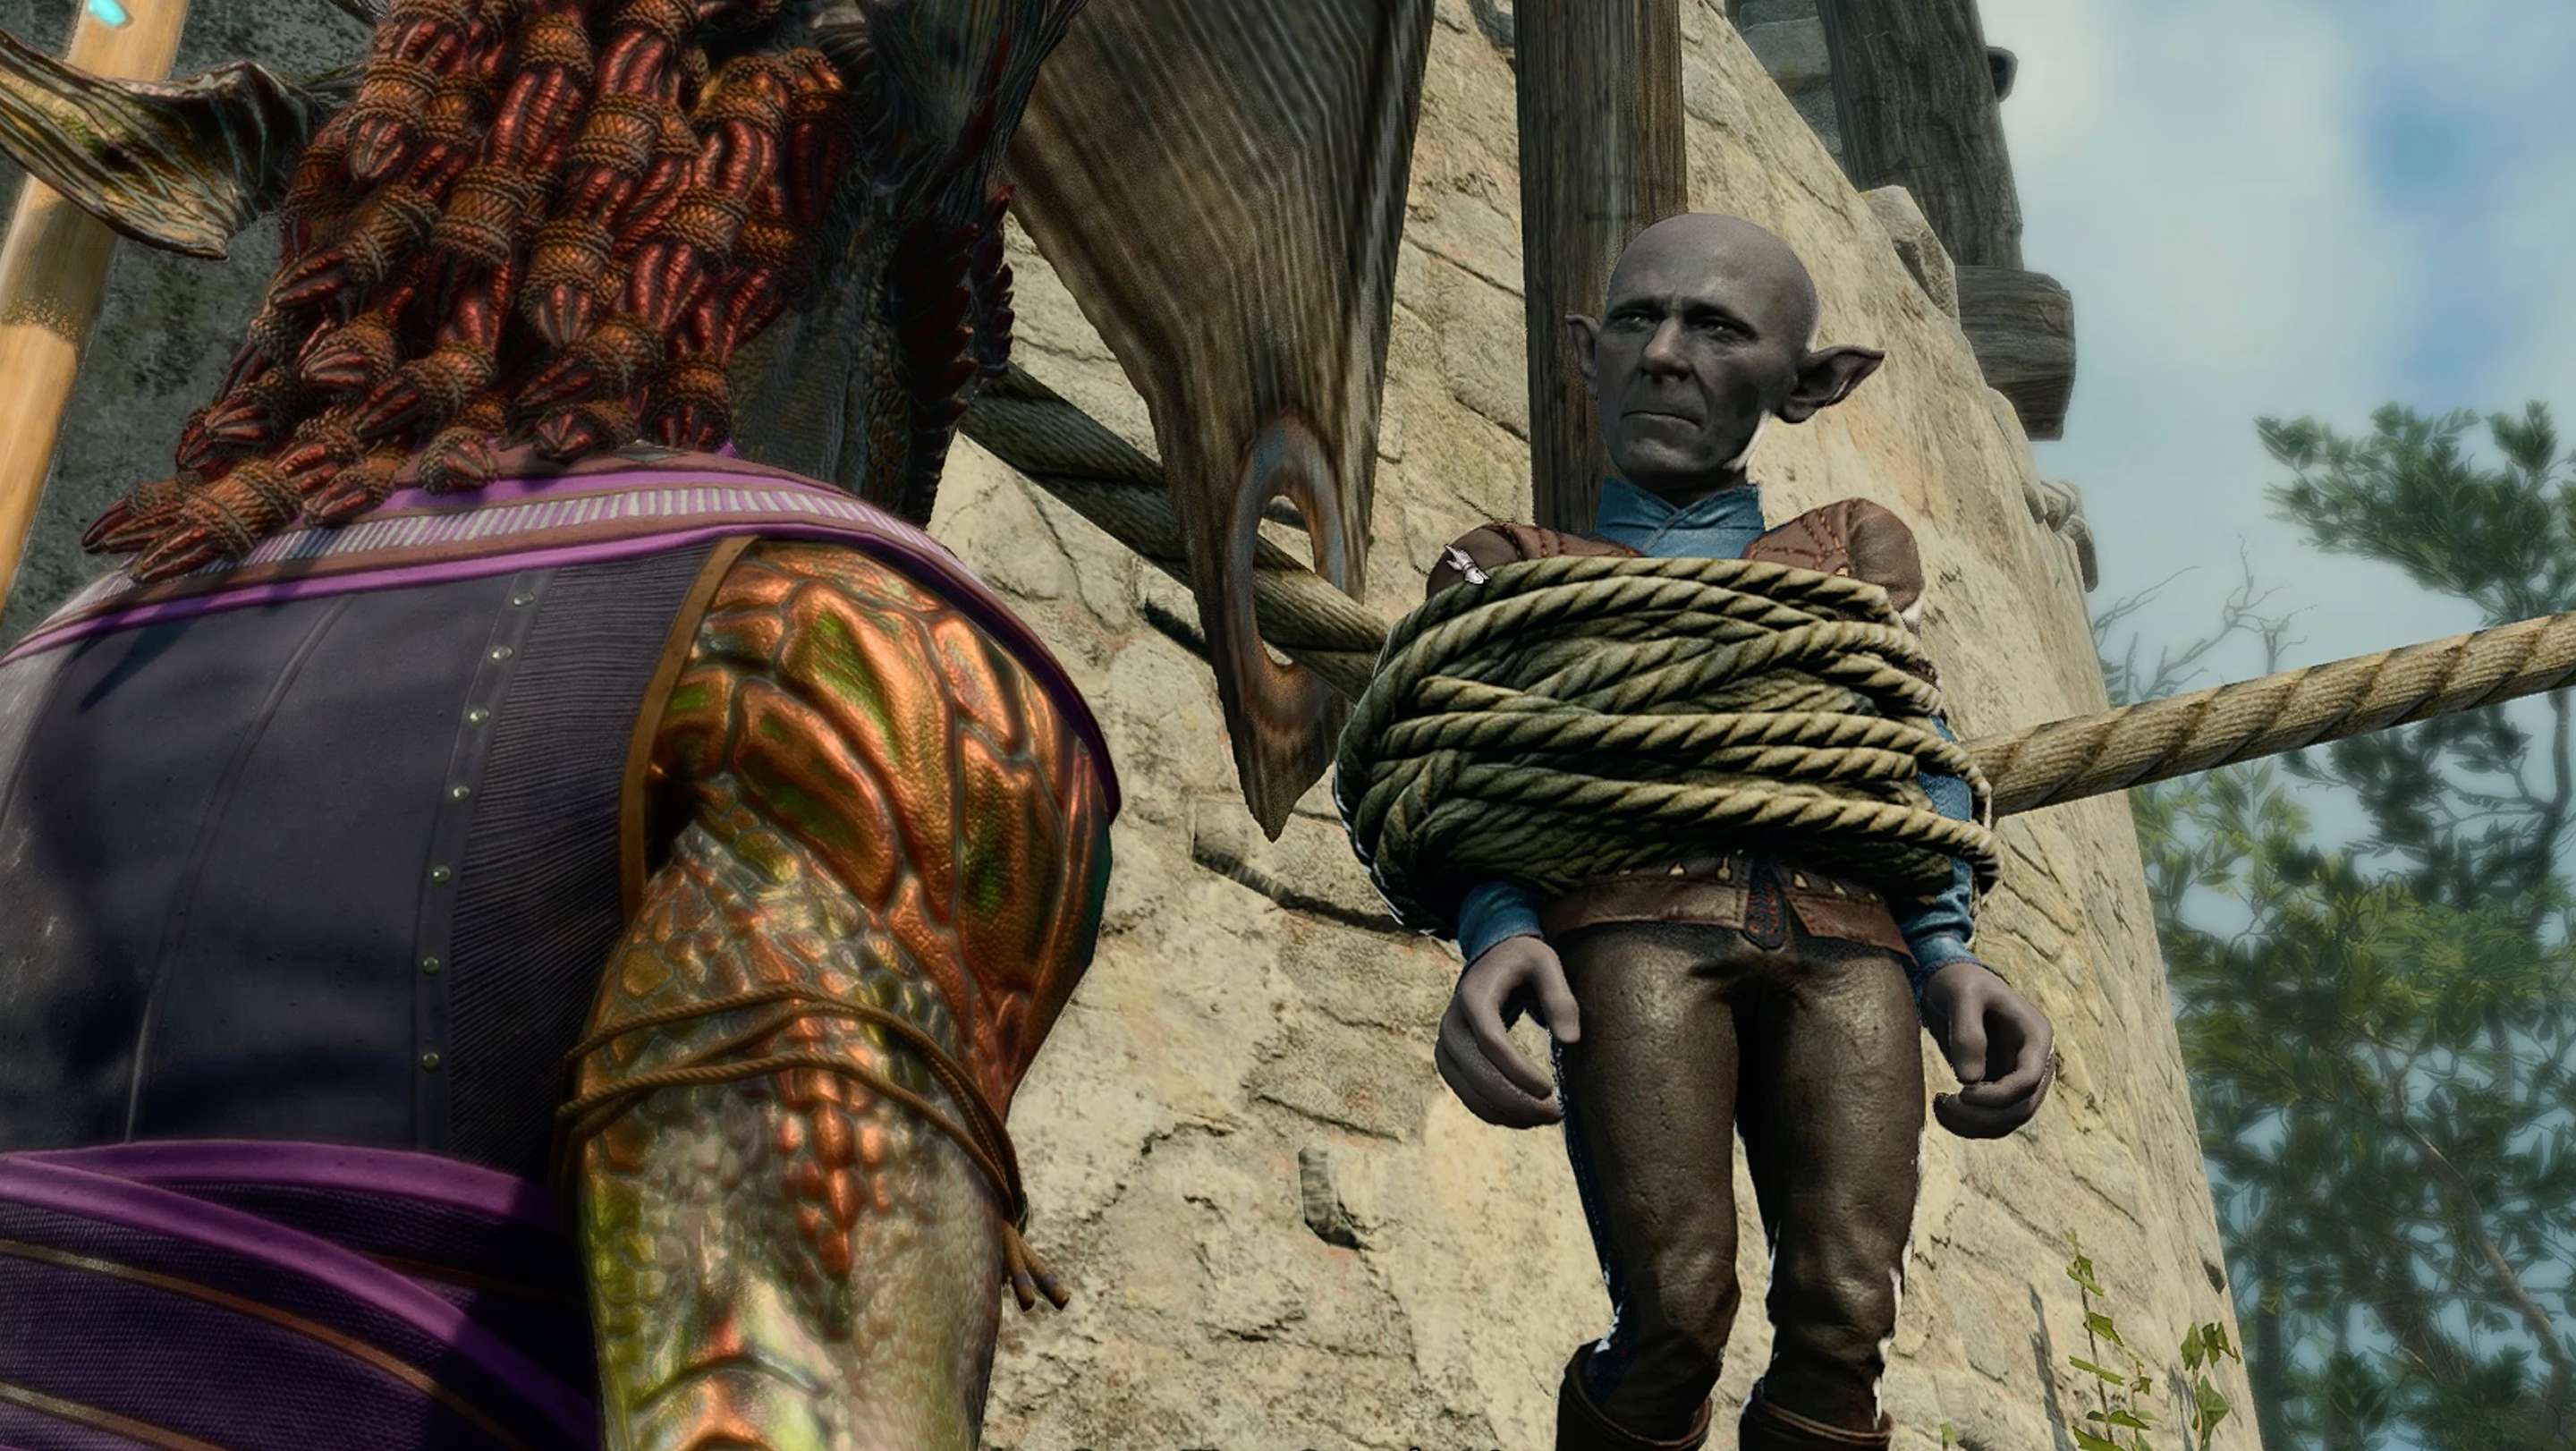 Barcus Wroot, a Deep Gnome, tied to a windmill blade in Baldur’s Gate 3.